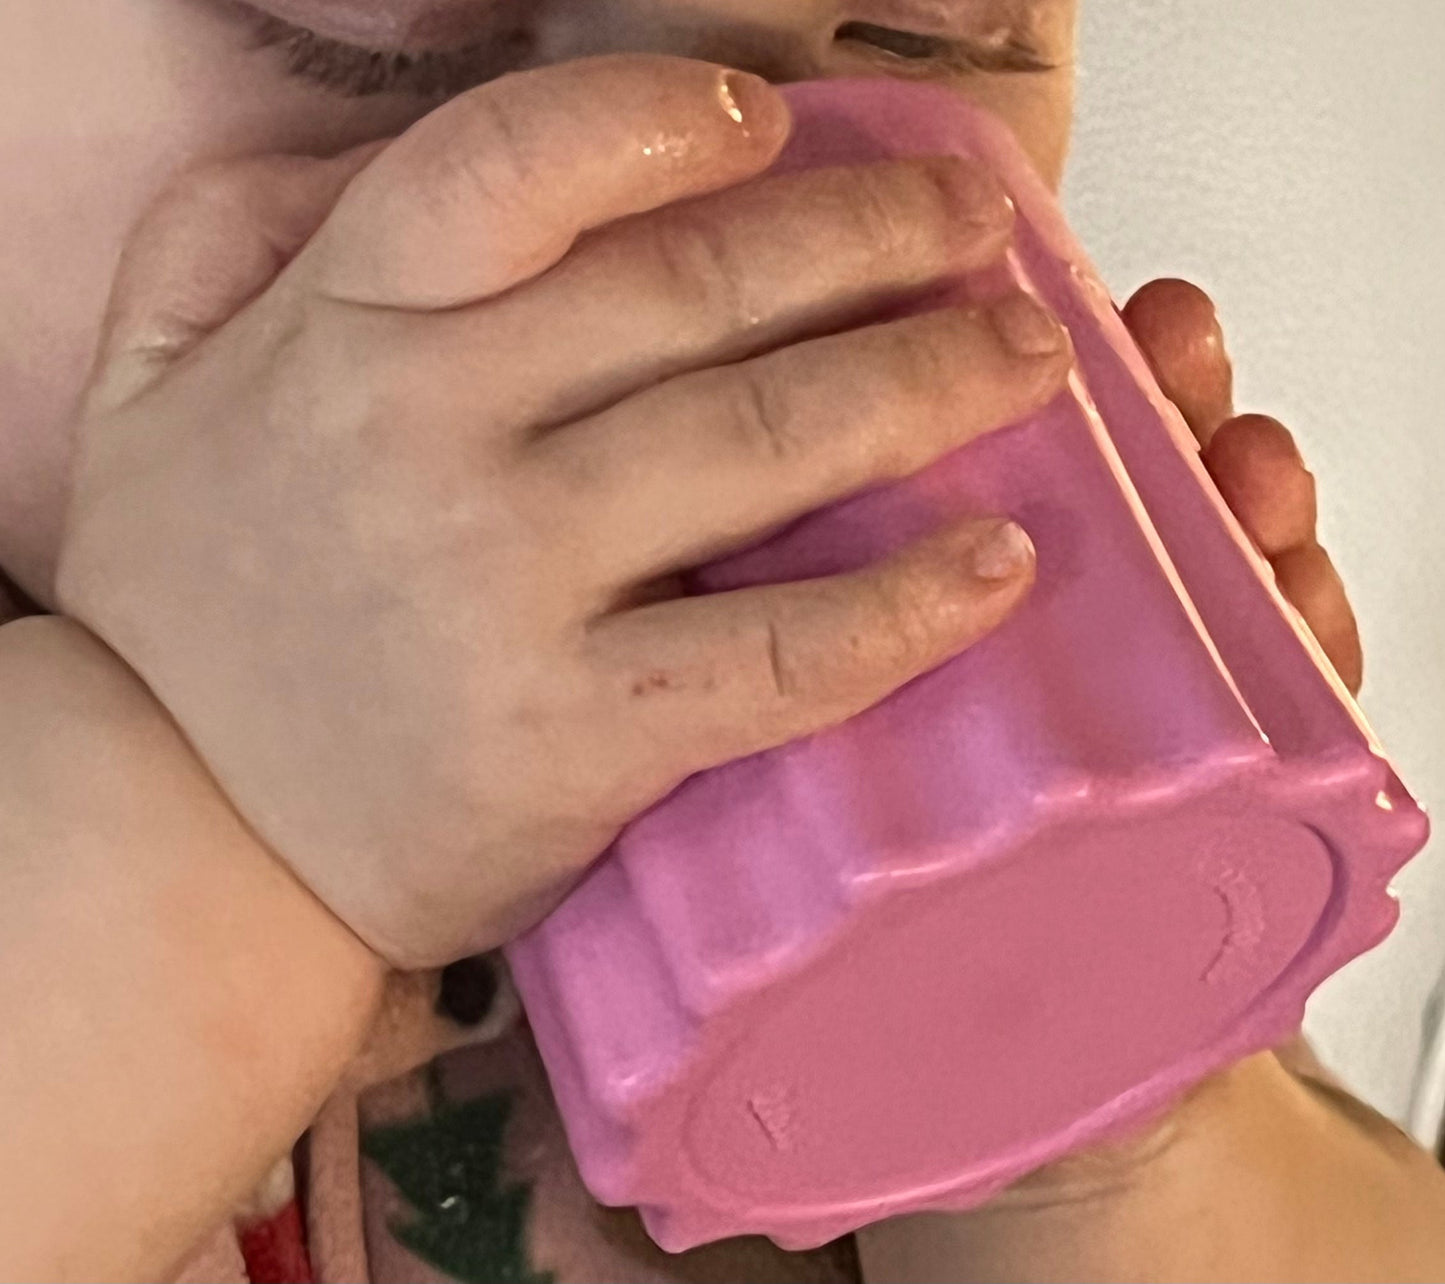 Baby Drinking From The Eztotz Pink Plastic Kid's Cup